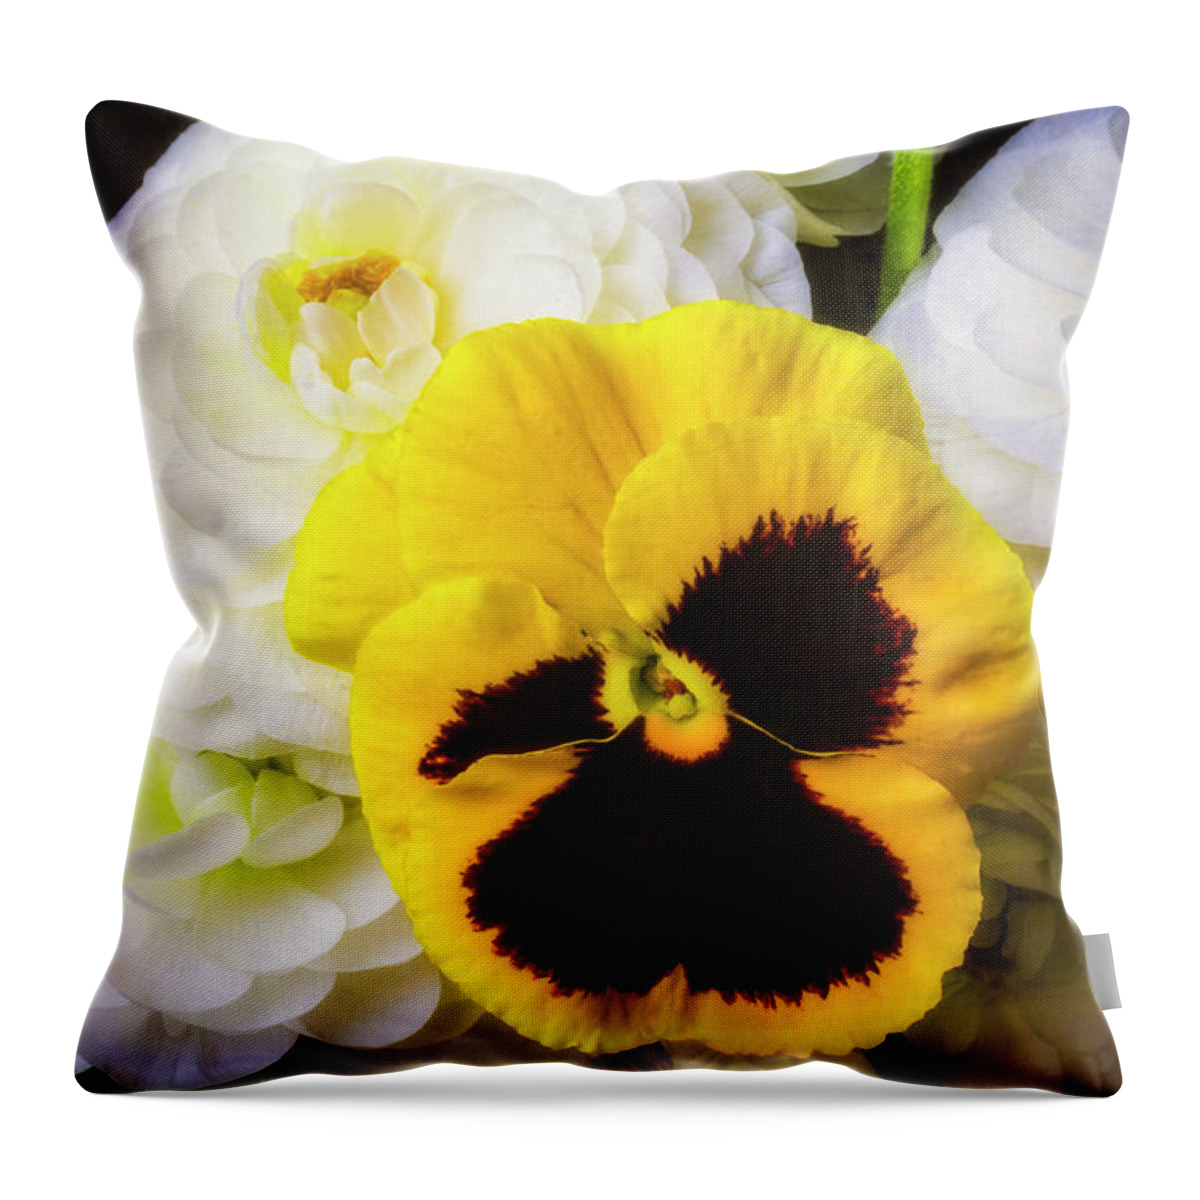 White Ranunculus Throw Pillow featuring the photograph Pansy And Ranunculus by Garry Gay